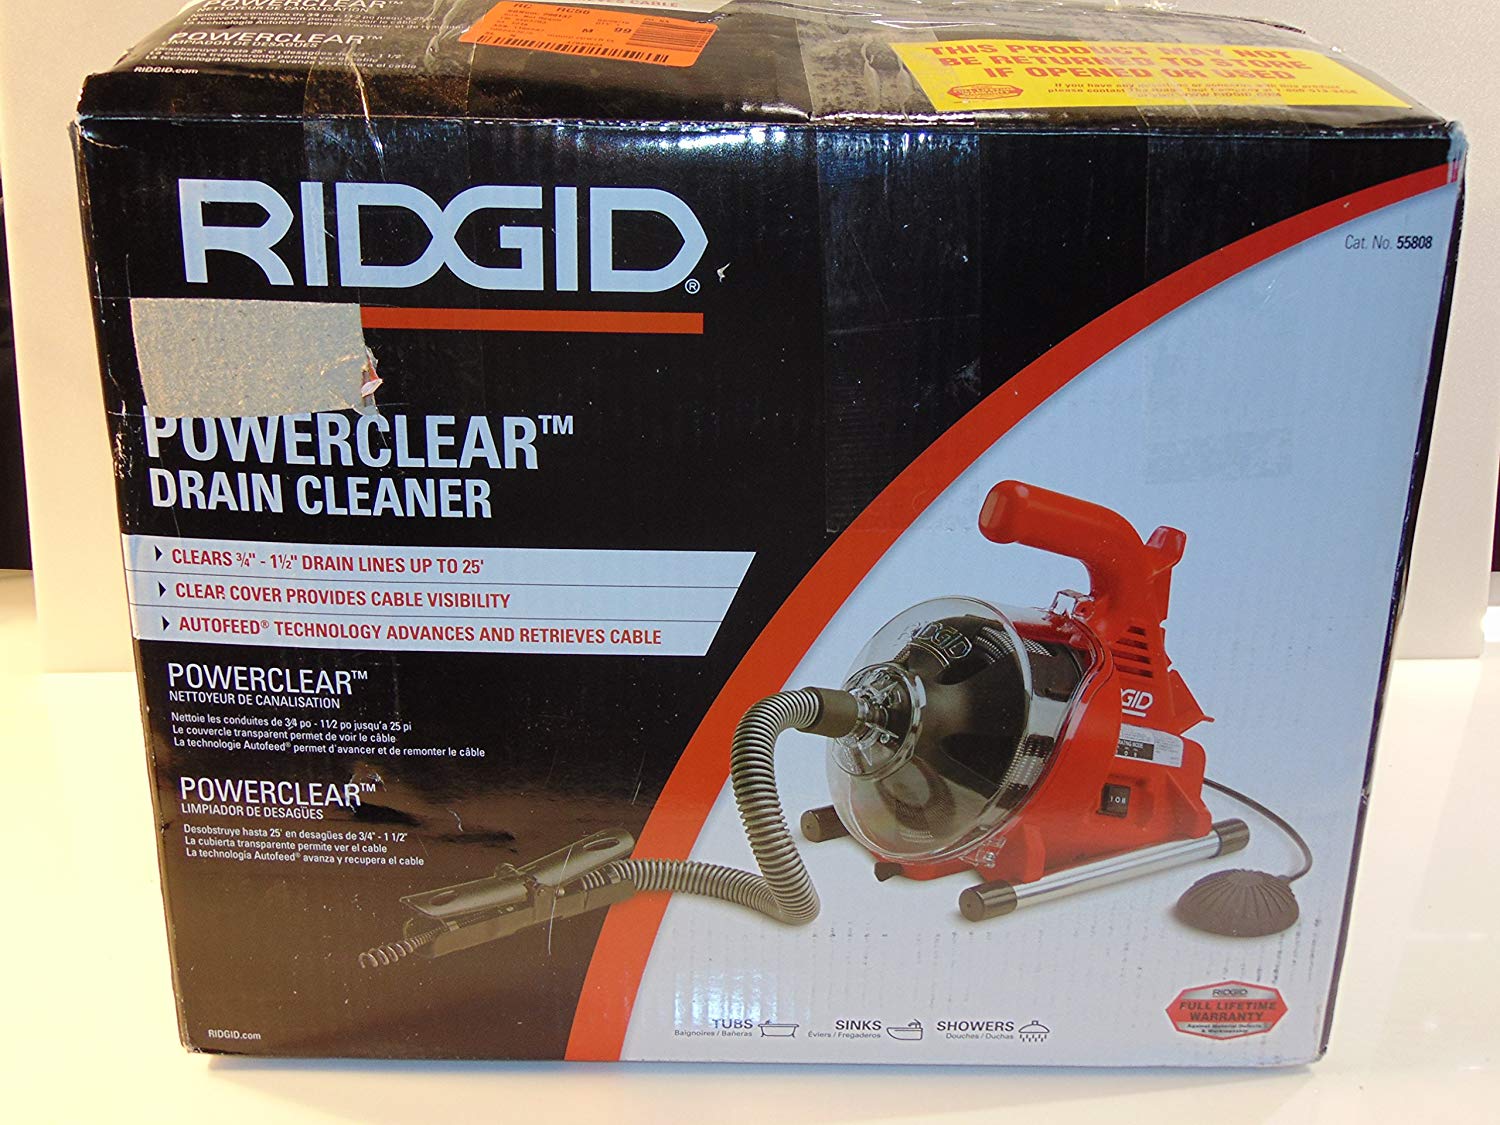 Ridgid 55808 PowerClear Drain Cleaning Machine 120V Drain Cleaner Cleans Tub, Shower or Sink Blockages from 3/4" to 11/2" diameter, Red